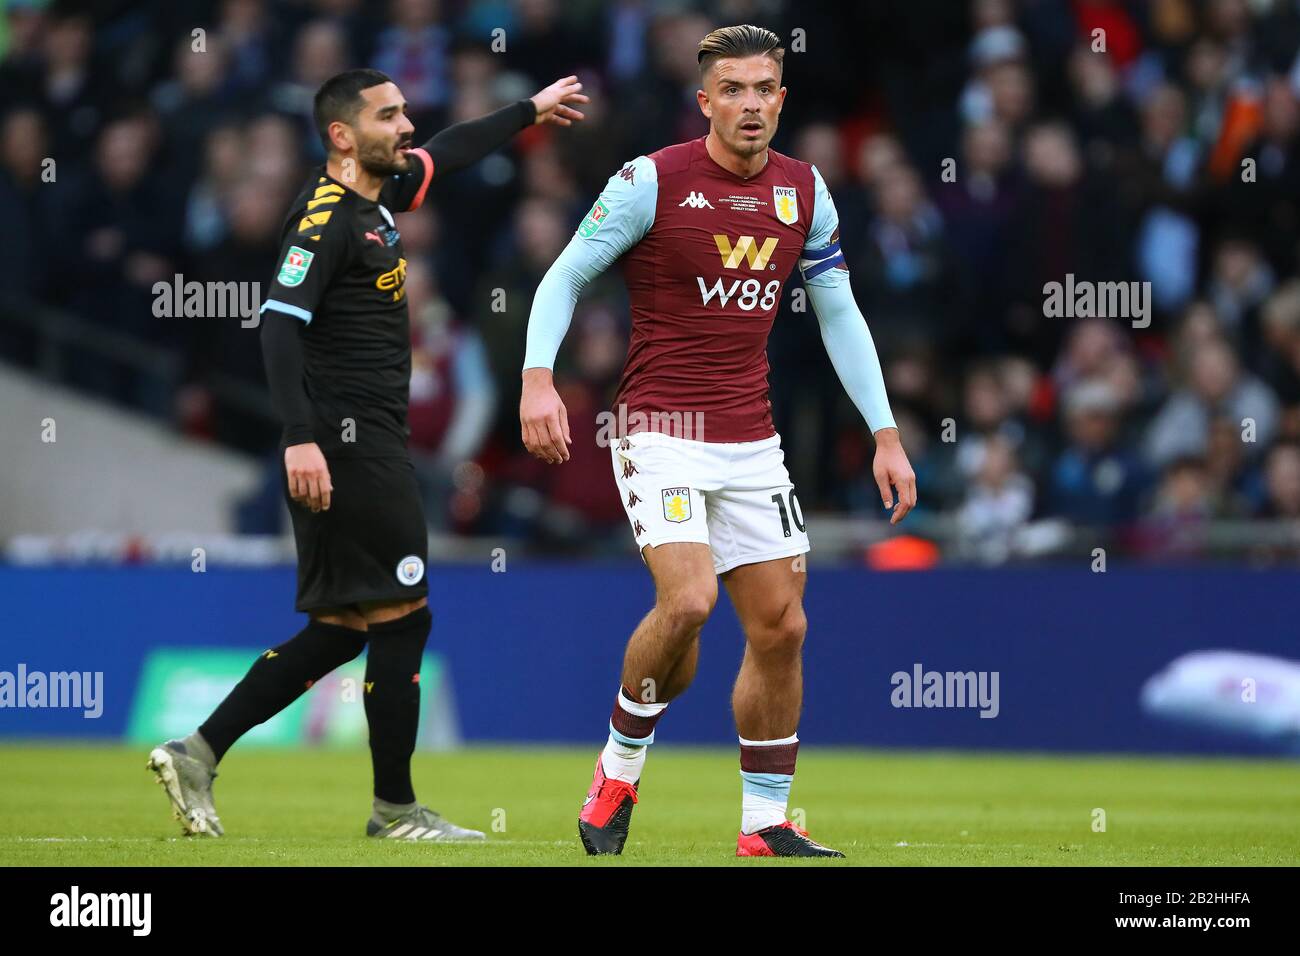 Jack Grealish of Aston Villa and Ilkay Gundogan of Manchester City - Aston Villa v Manchester City, Carabao Cup Final, Wembley Stadium, London, UK - 1st March 2020  Editorial Use Only - DataCo restrictions apply Stock Photo